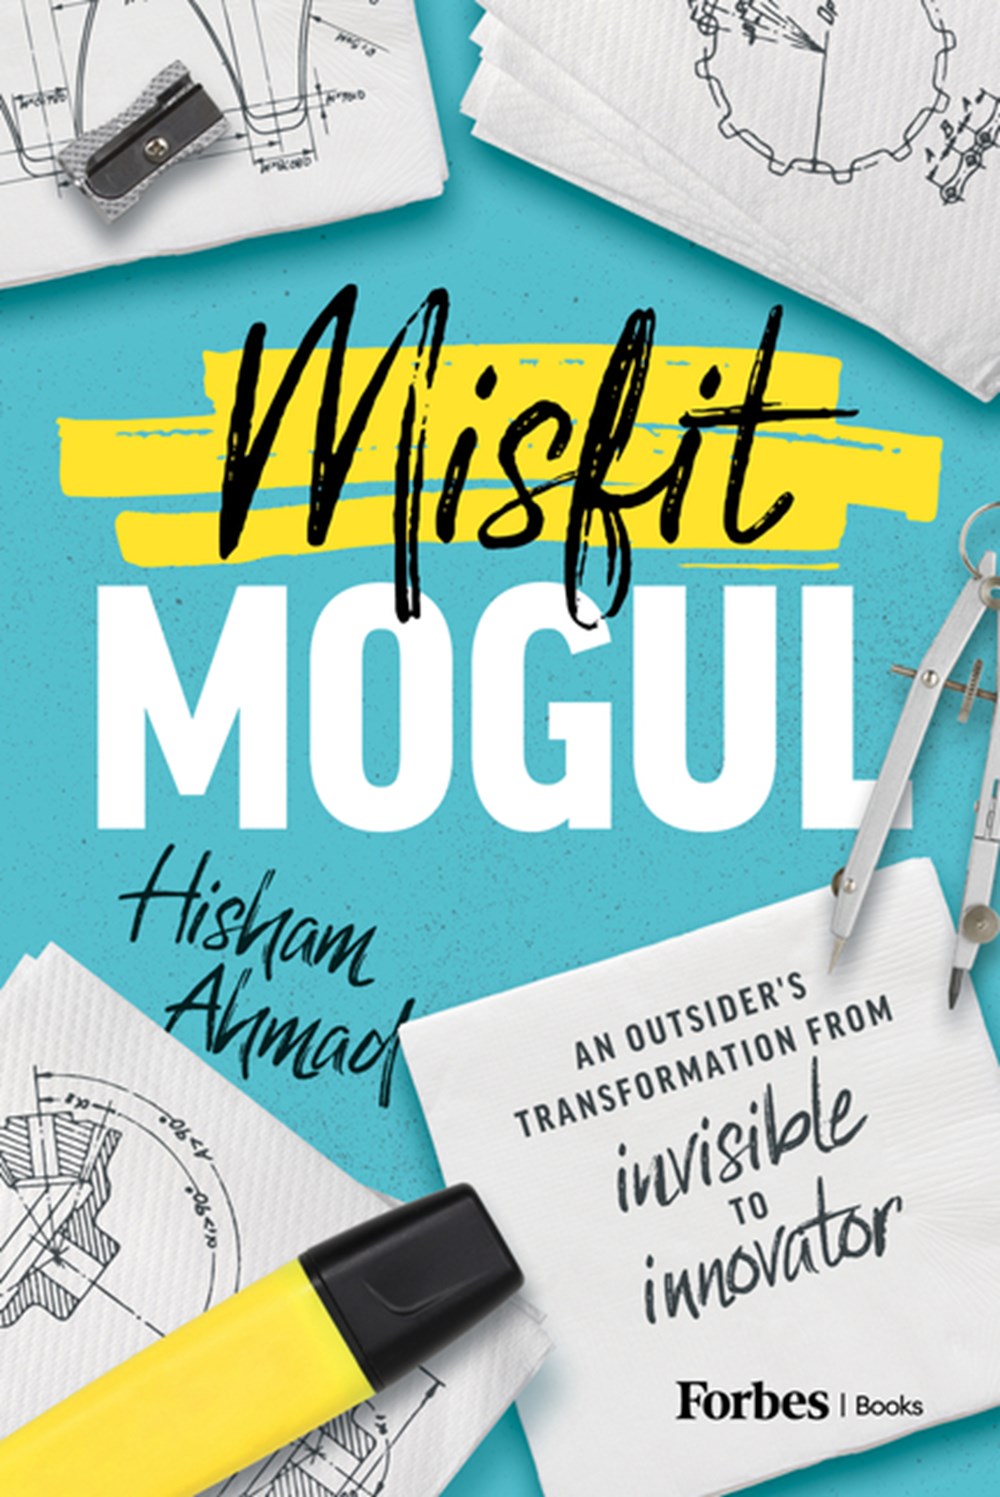 Misfit Mogul: An Outsider's Transformation from Invisible to Innovator